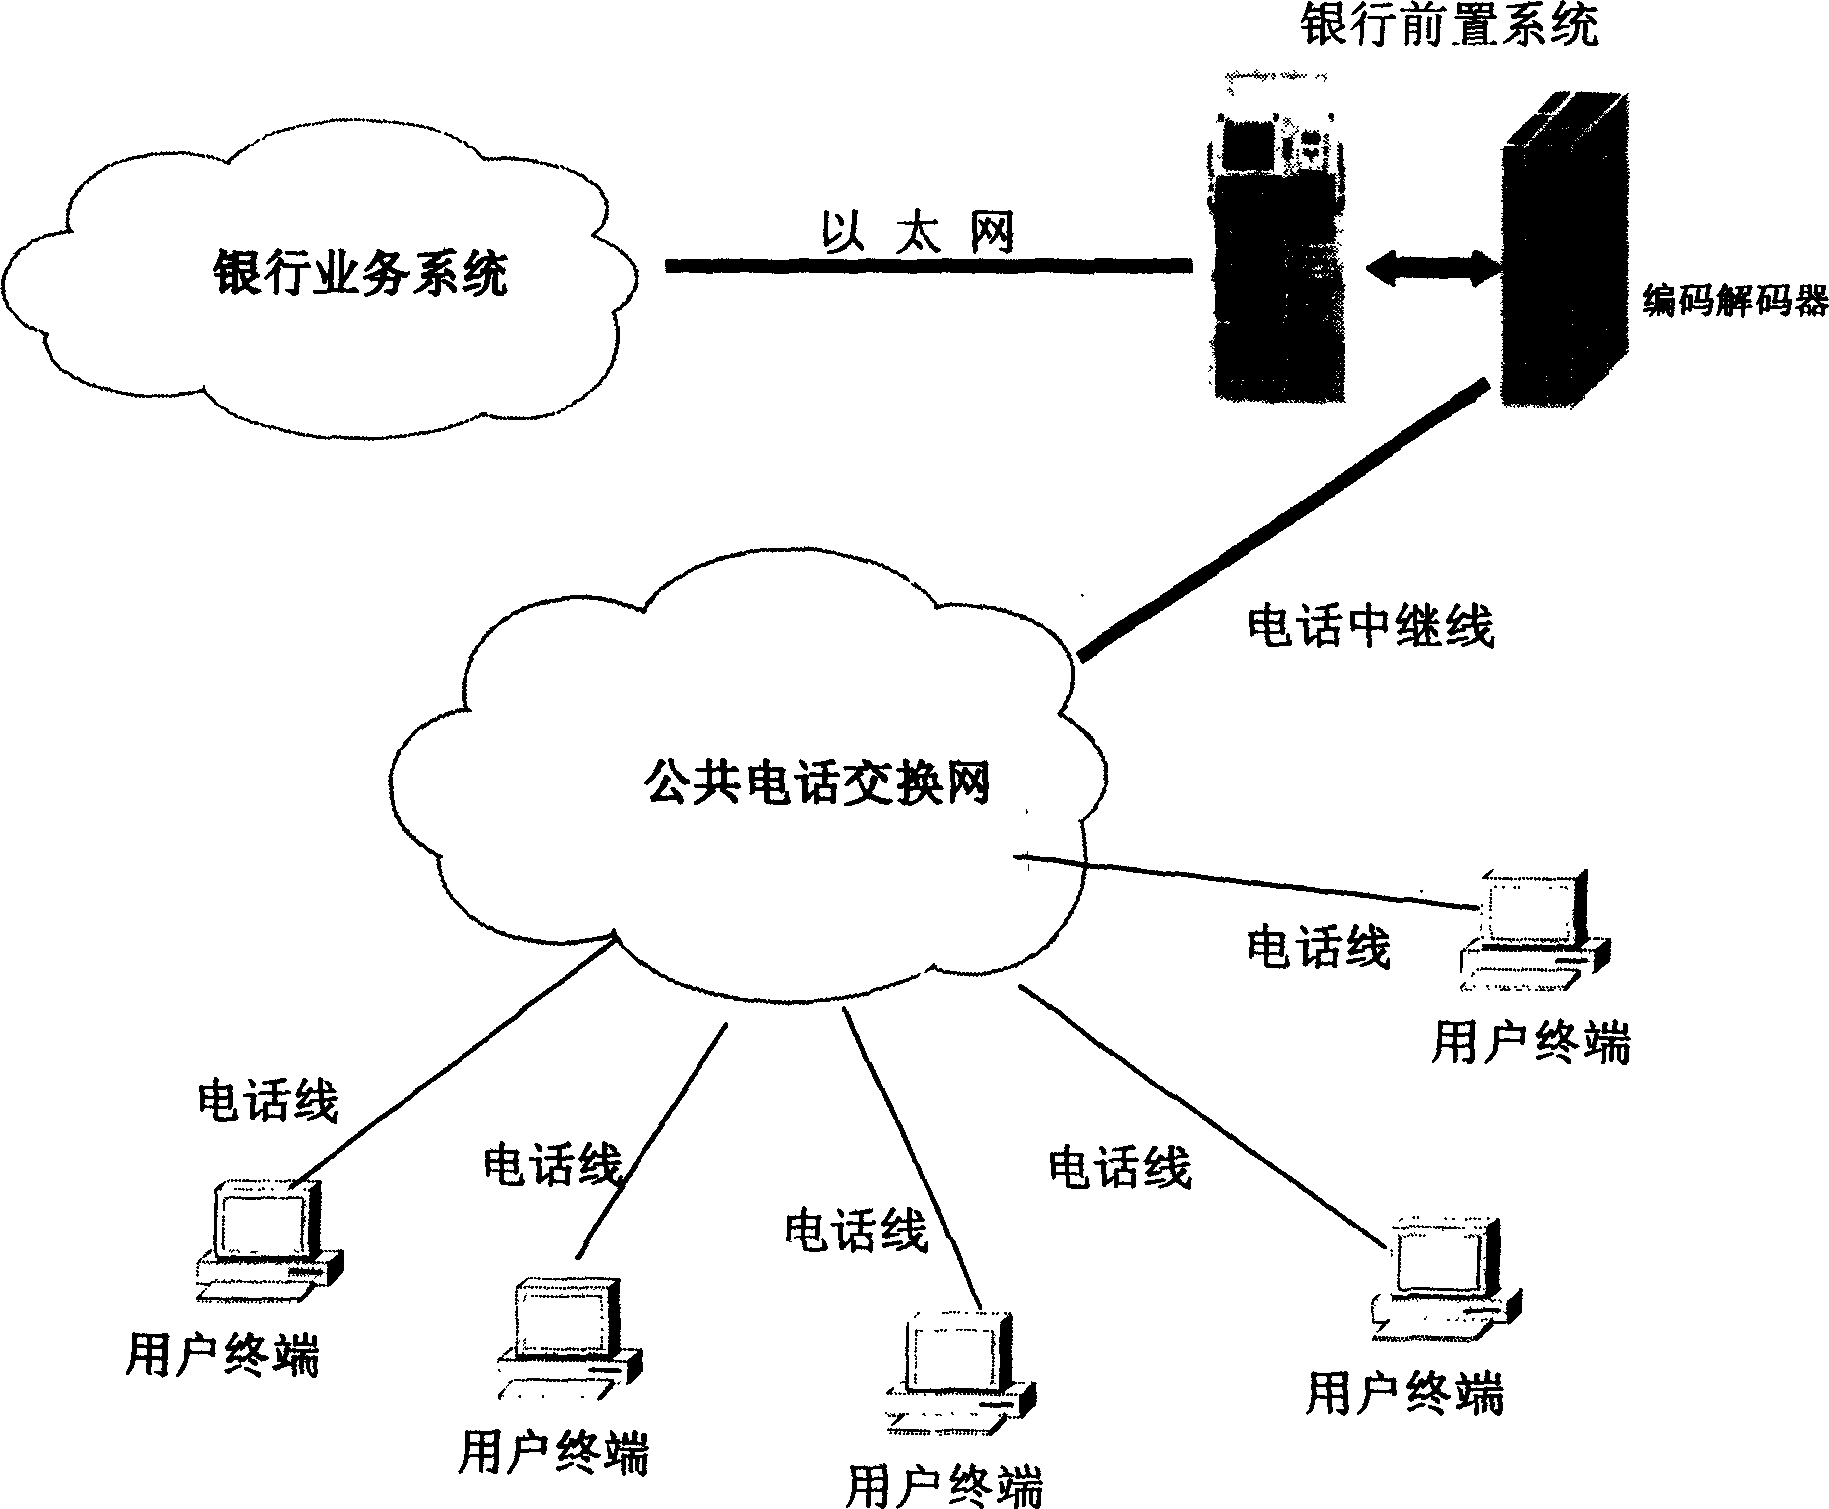 Wired self-service banking user terminal system